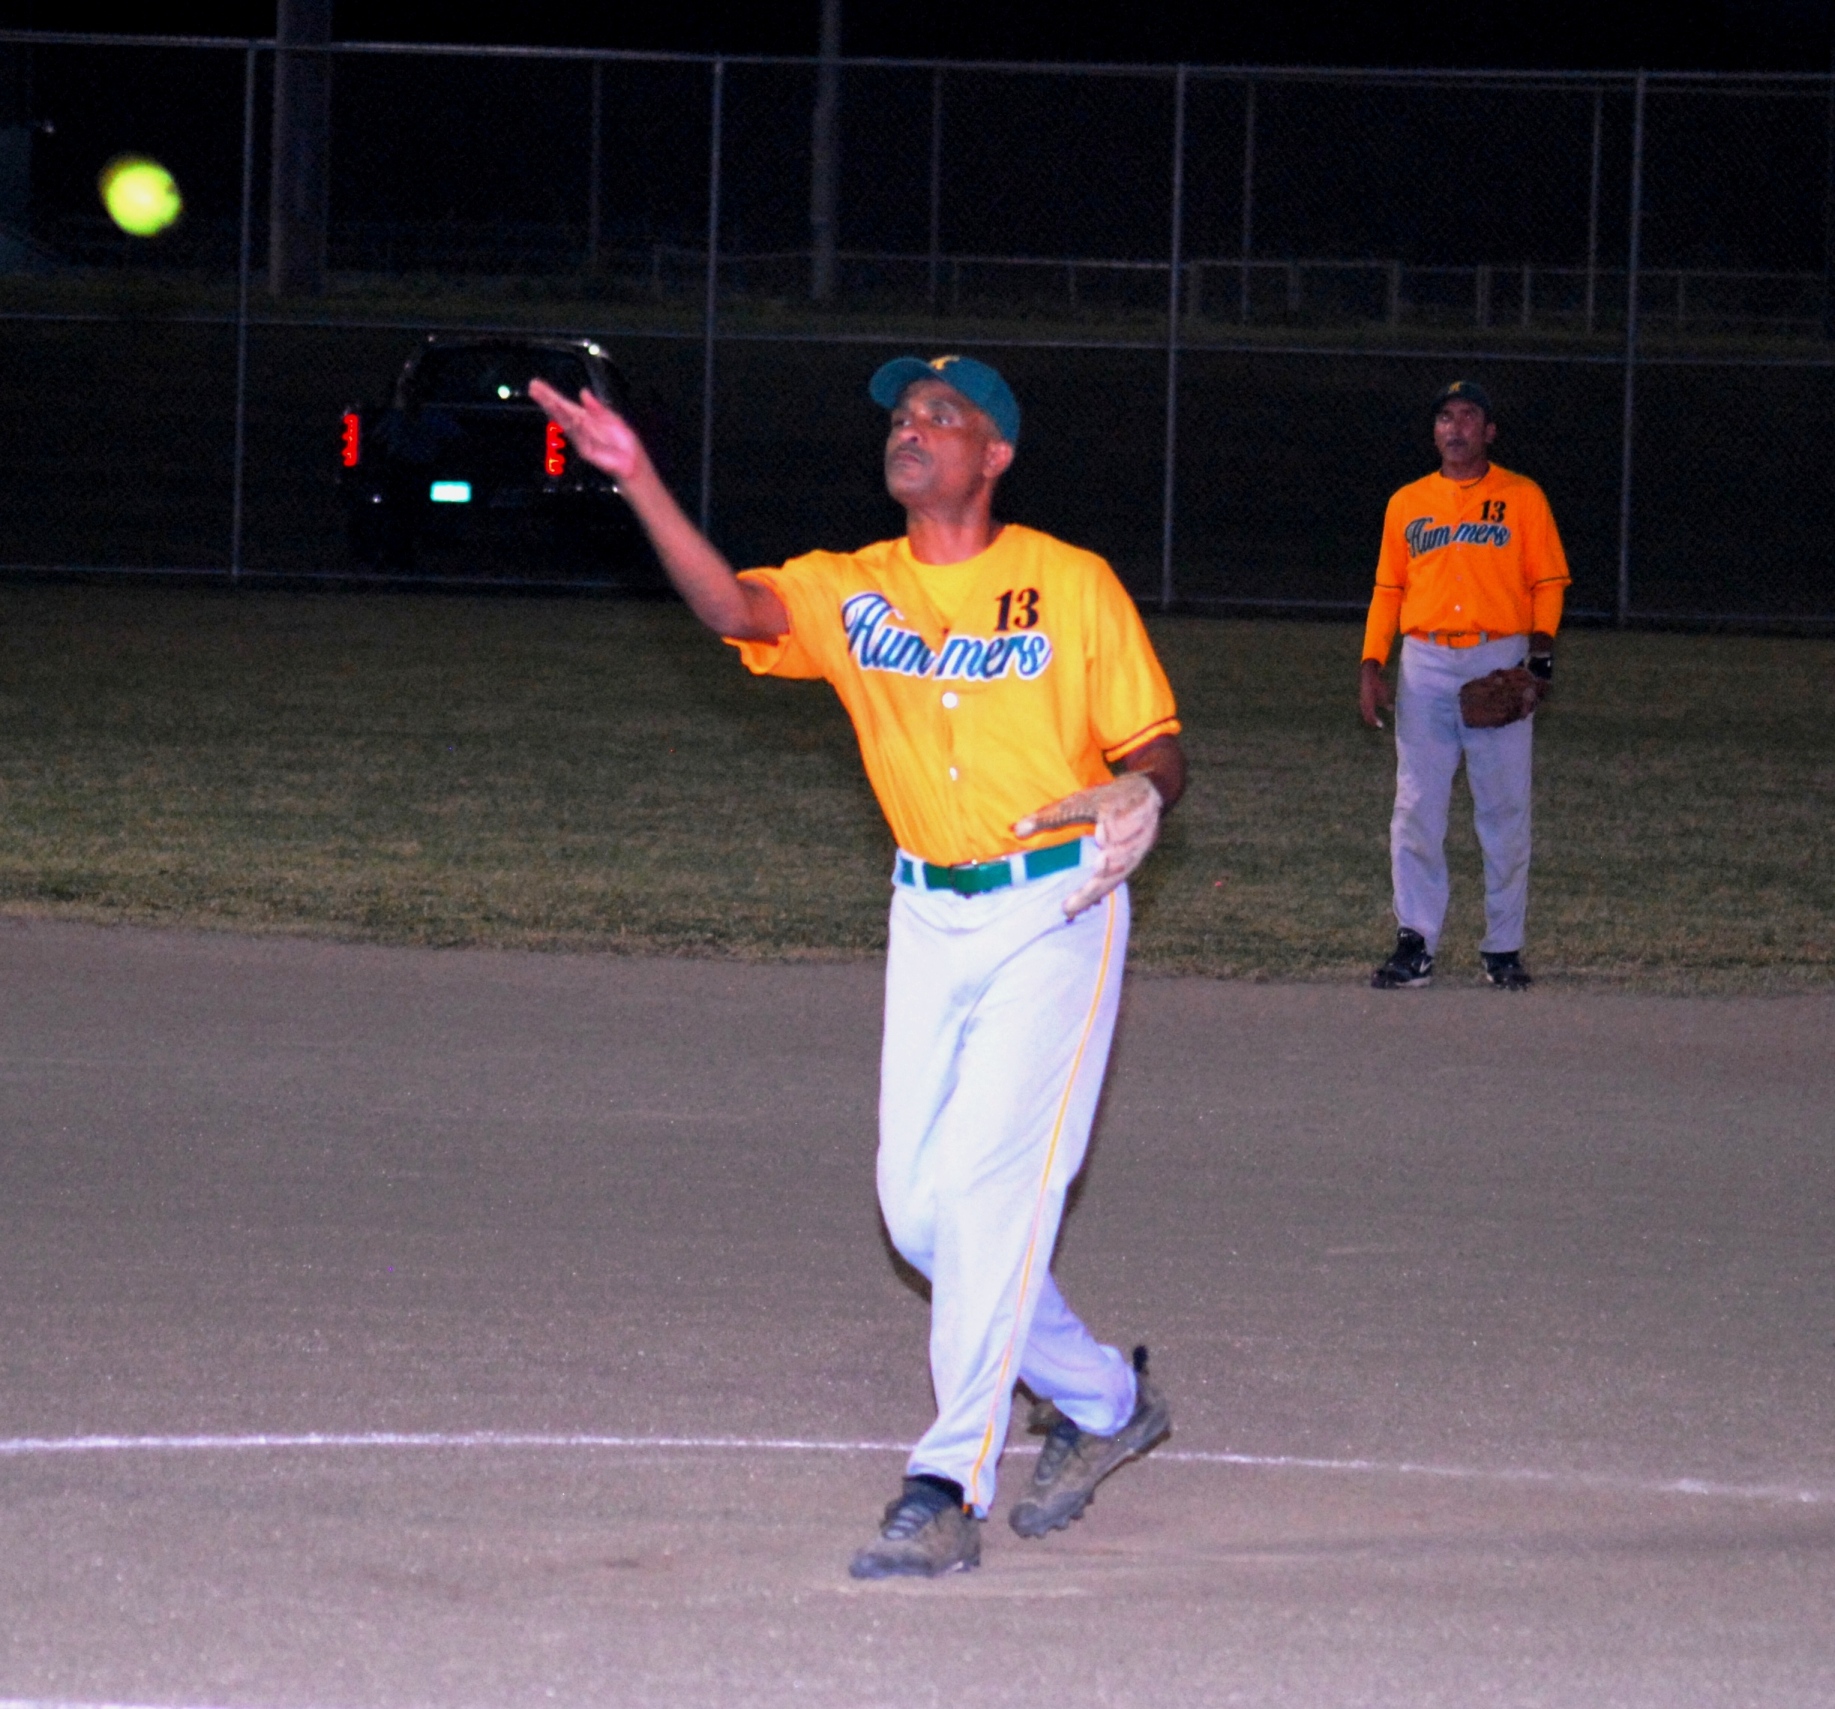 Hummers ace Jerry Vialet shut down Softball Inc. in game two's late innings.